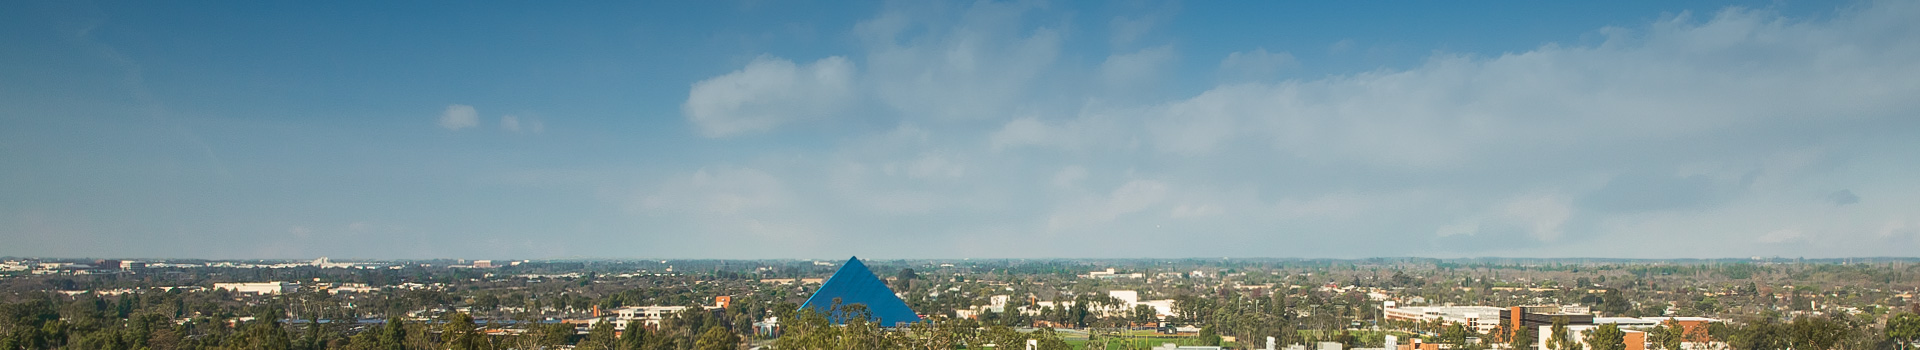 Aerial view of Walter Pyramid